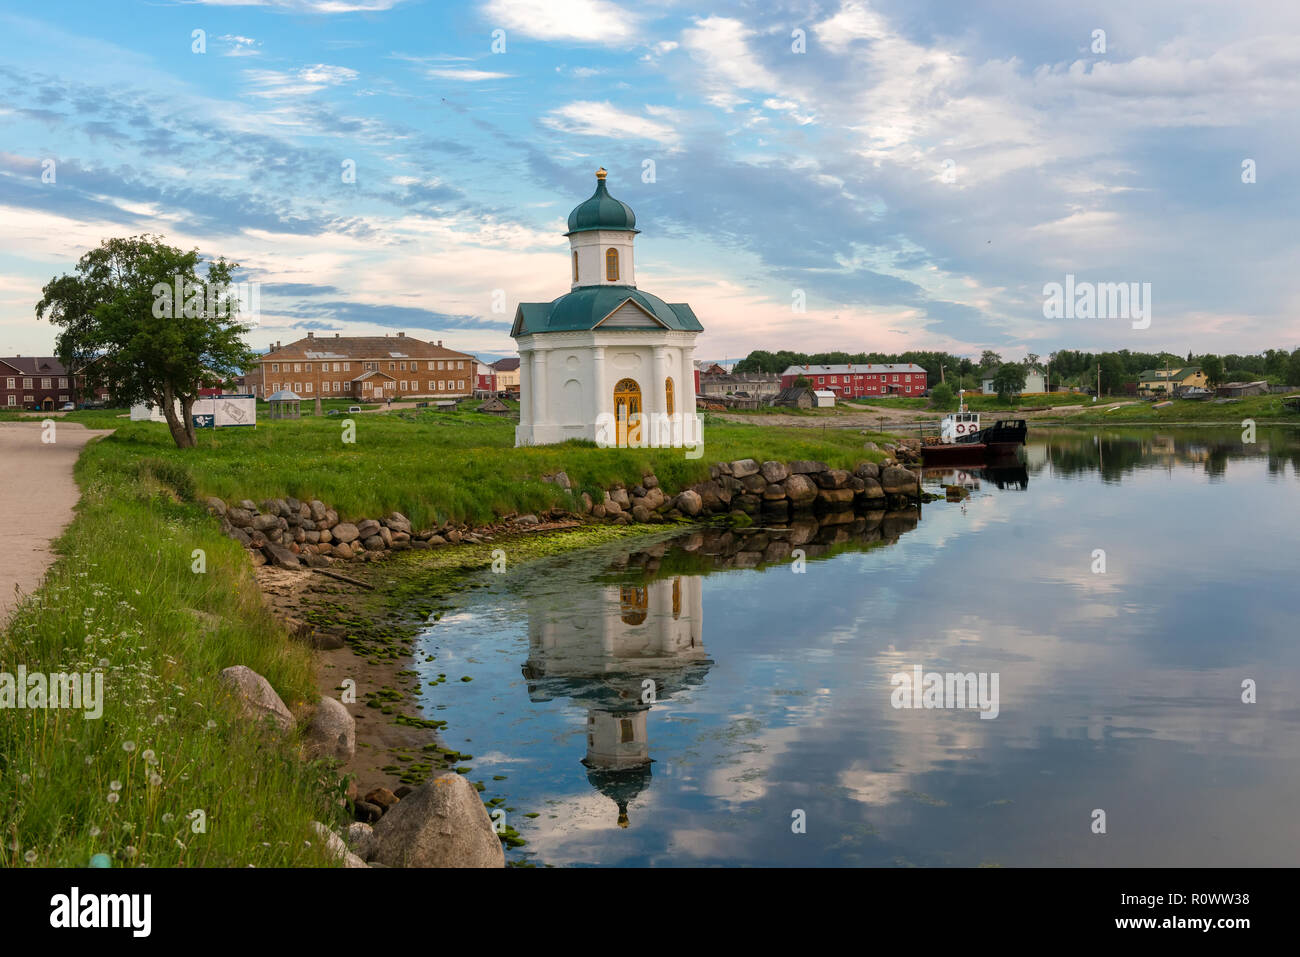 View on Solovetsky Monastery from the Bay of well-being, Russia. Solovetsky Monastery is on the UNESCO's World Heritage List. Stock Photo